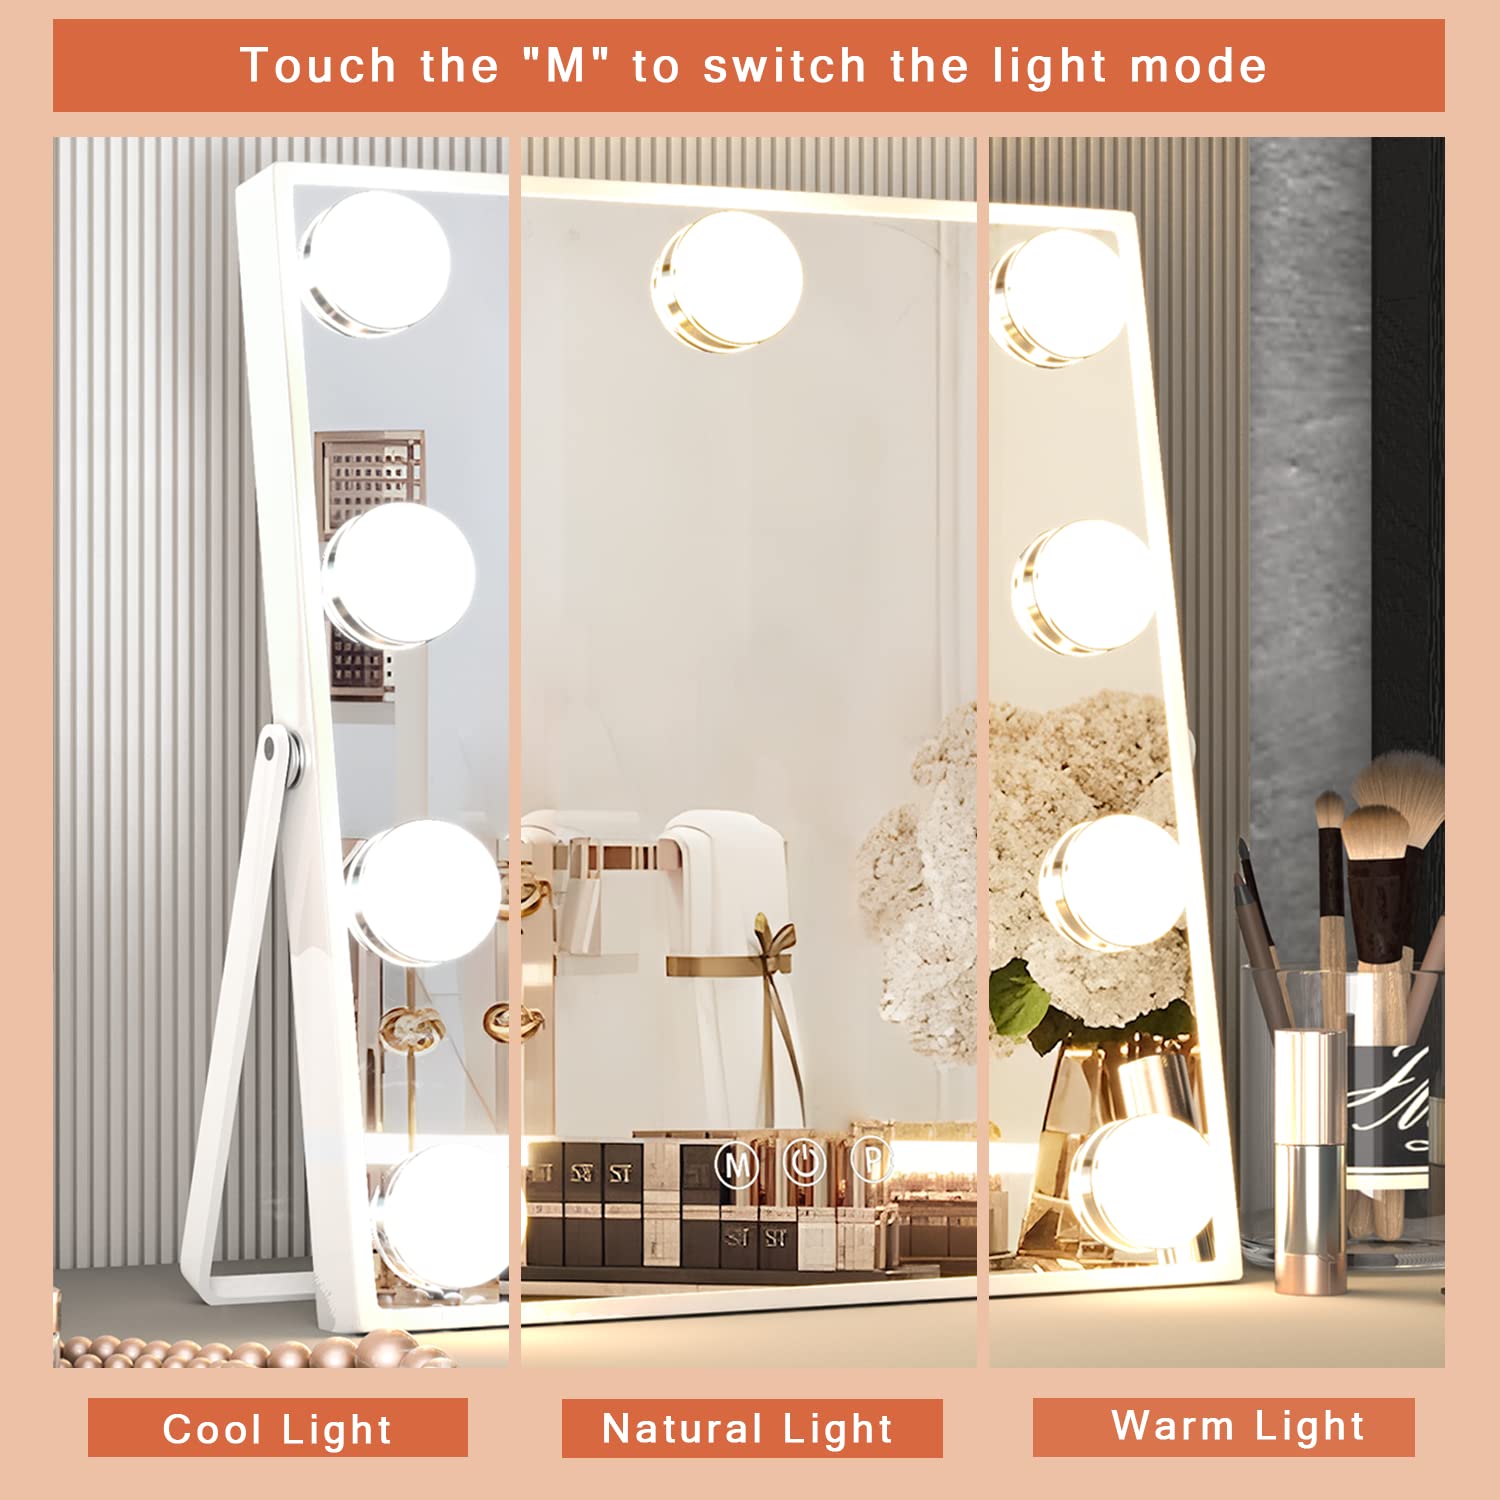 Manocorro Hollywood Vanity Mirror with Lights, Hollywood Makeup Mirror with 9 LED Bulbs, Vanity Mirror with 3 color Lighting Mod